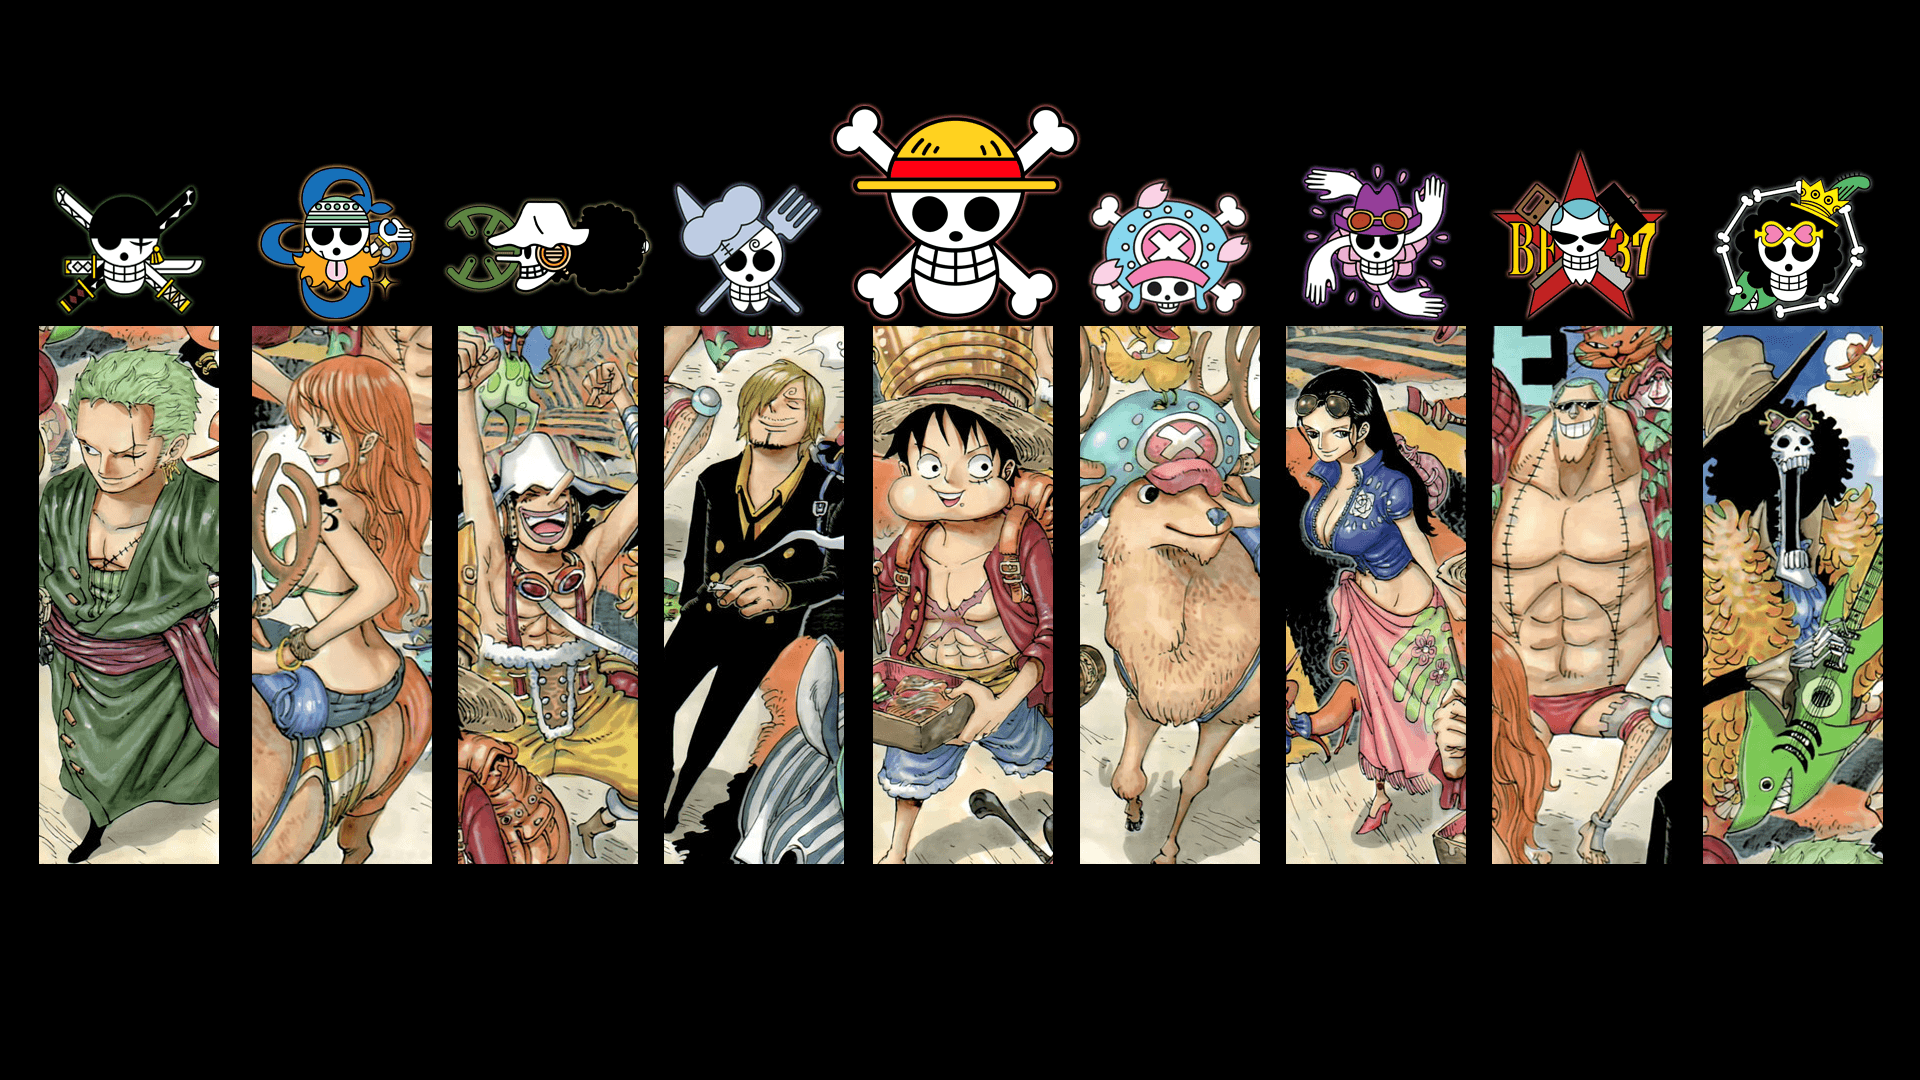 1920x1080 Hd One Piece Wallpaper Background For Download